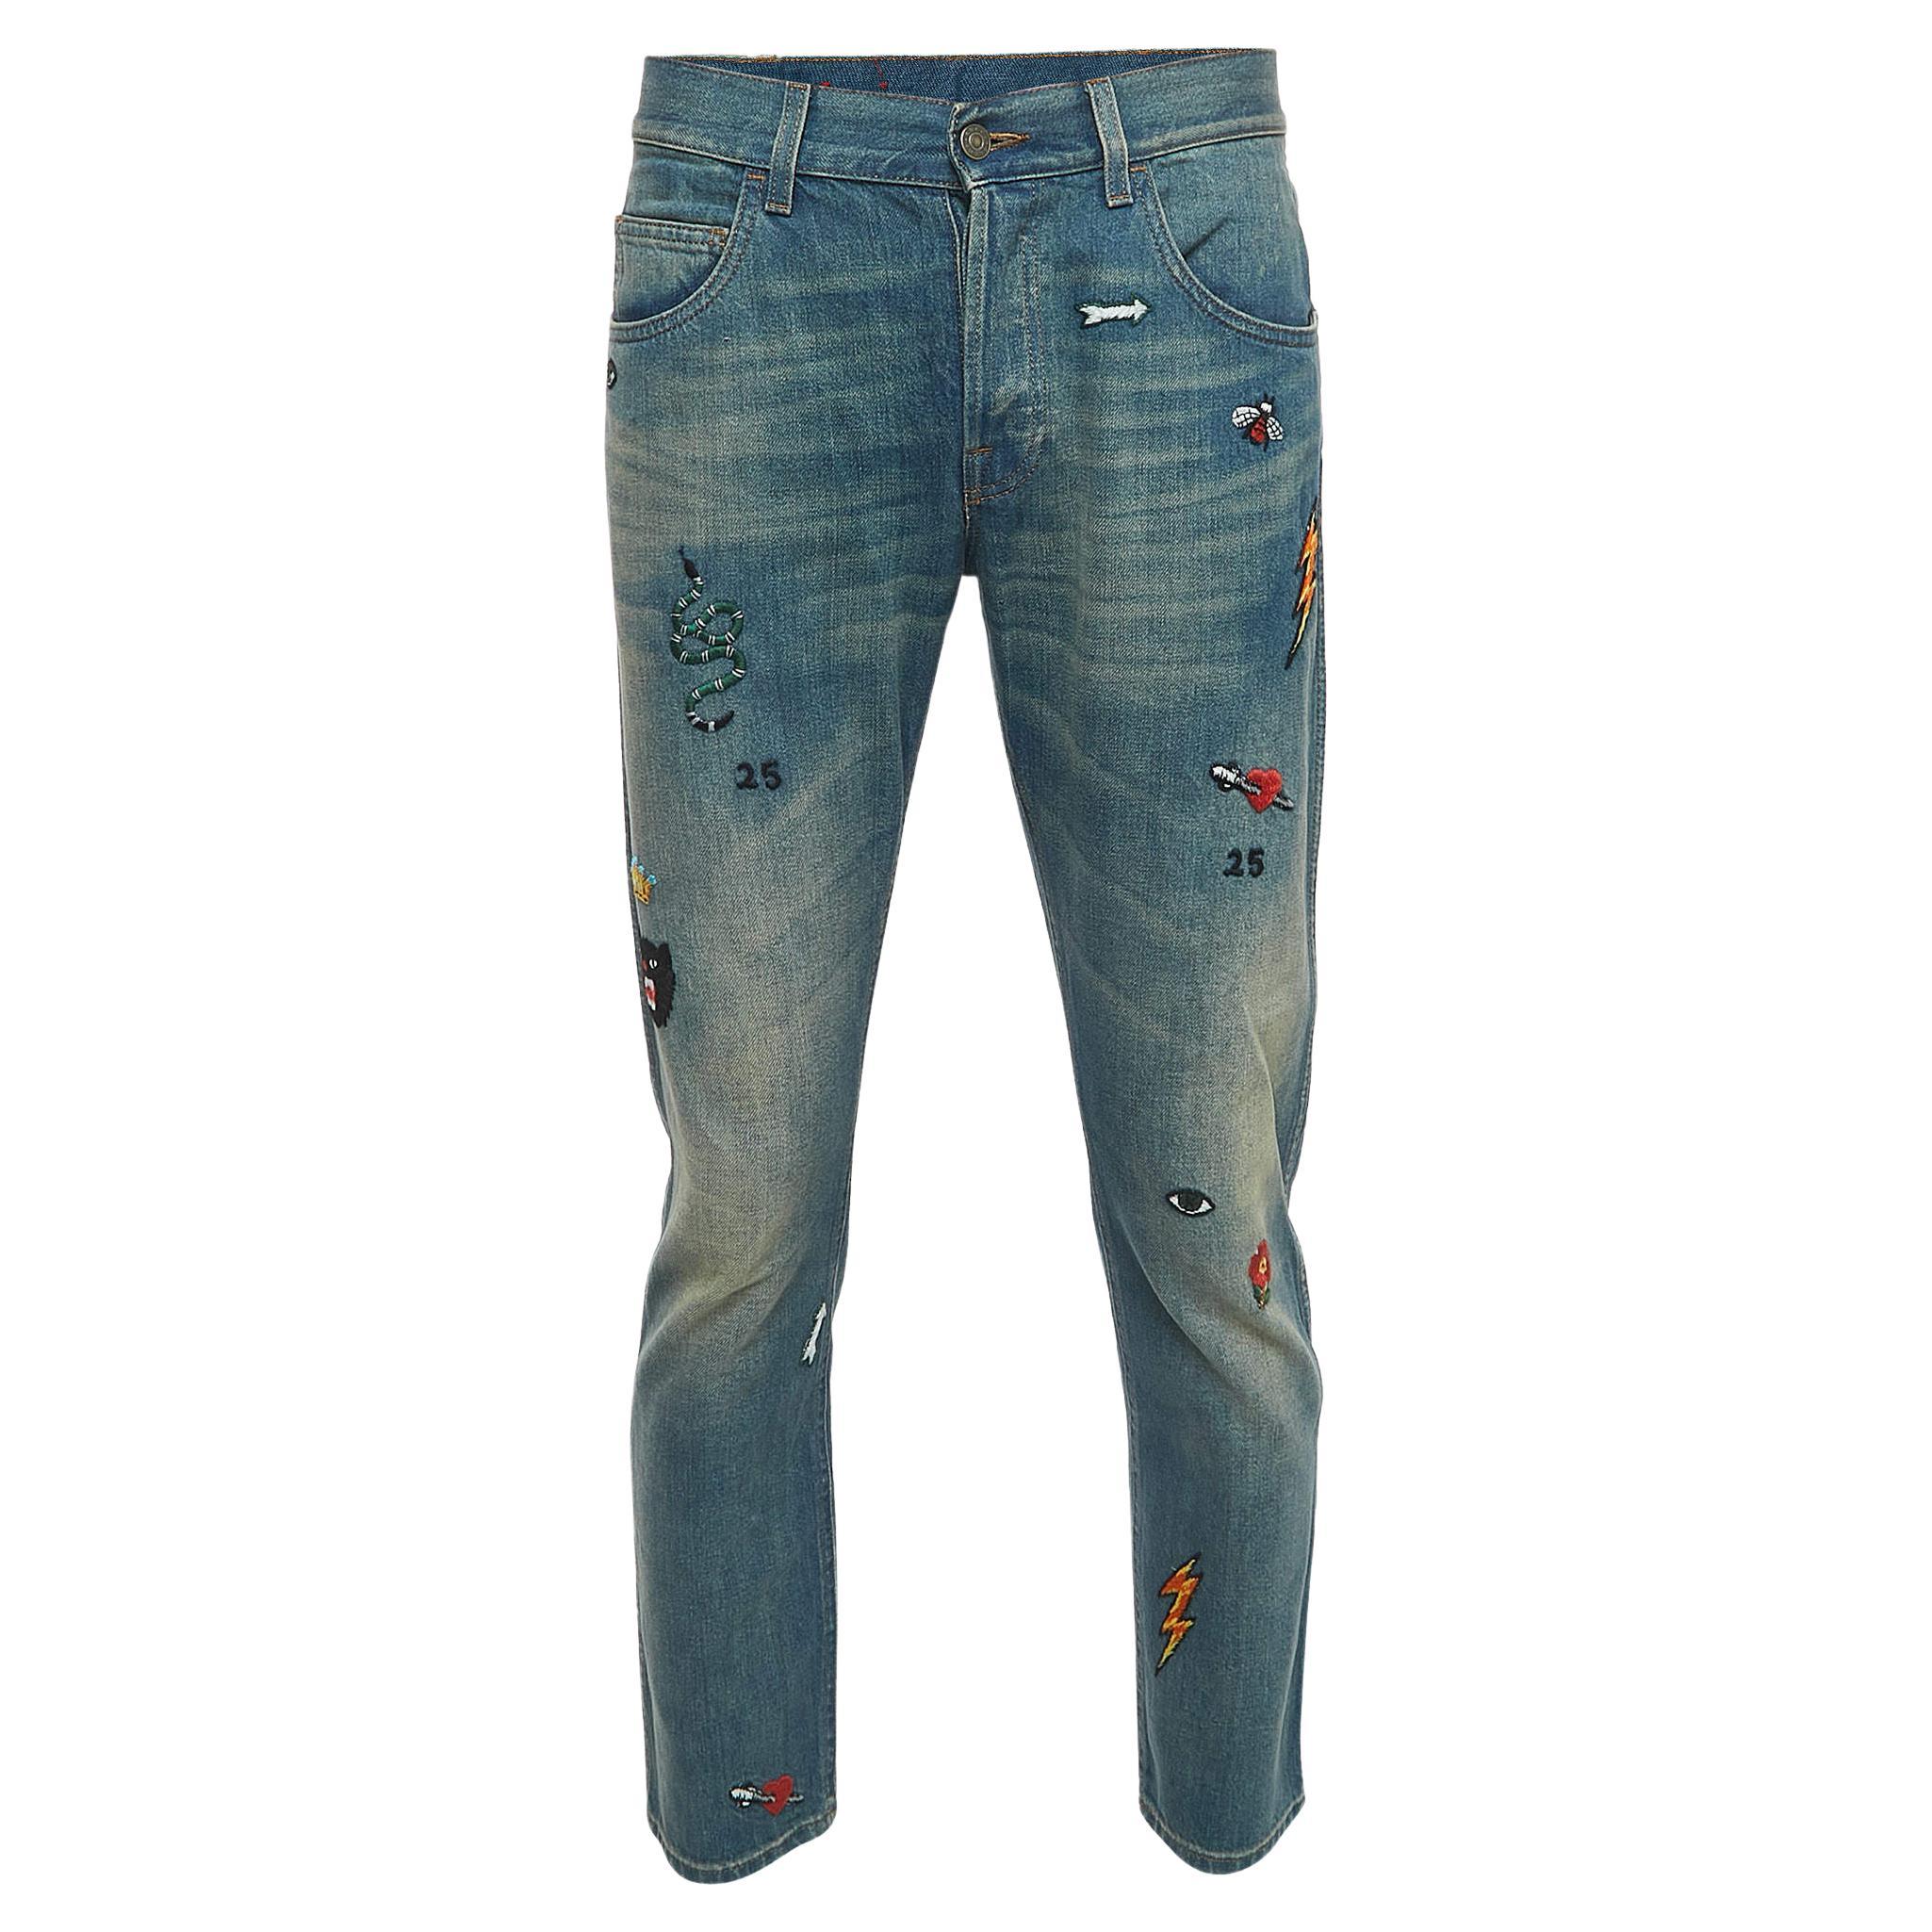 Gucci Blue Washed & Embroidered Denim Jeans L Waist 34" For Sale